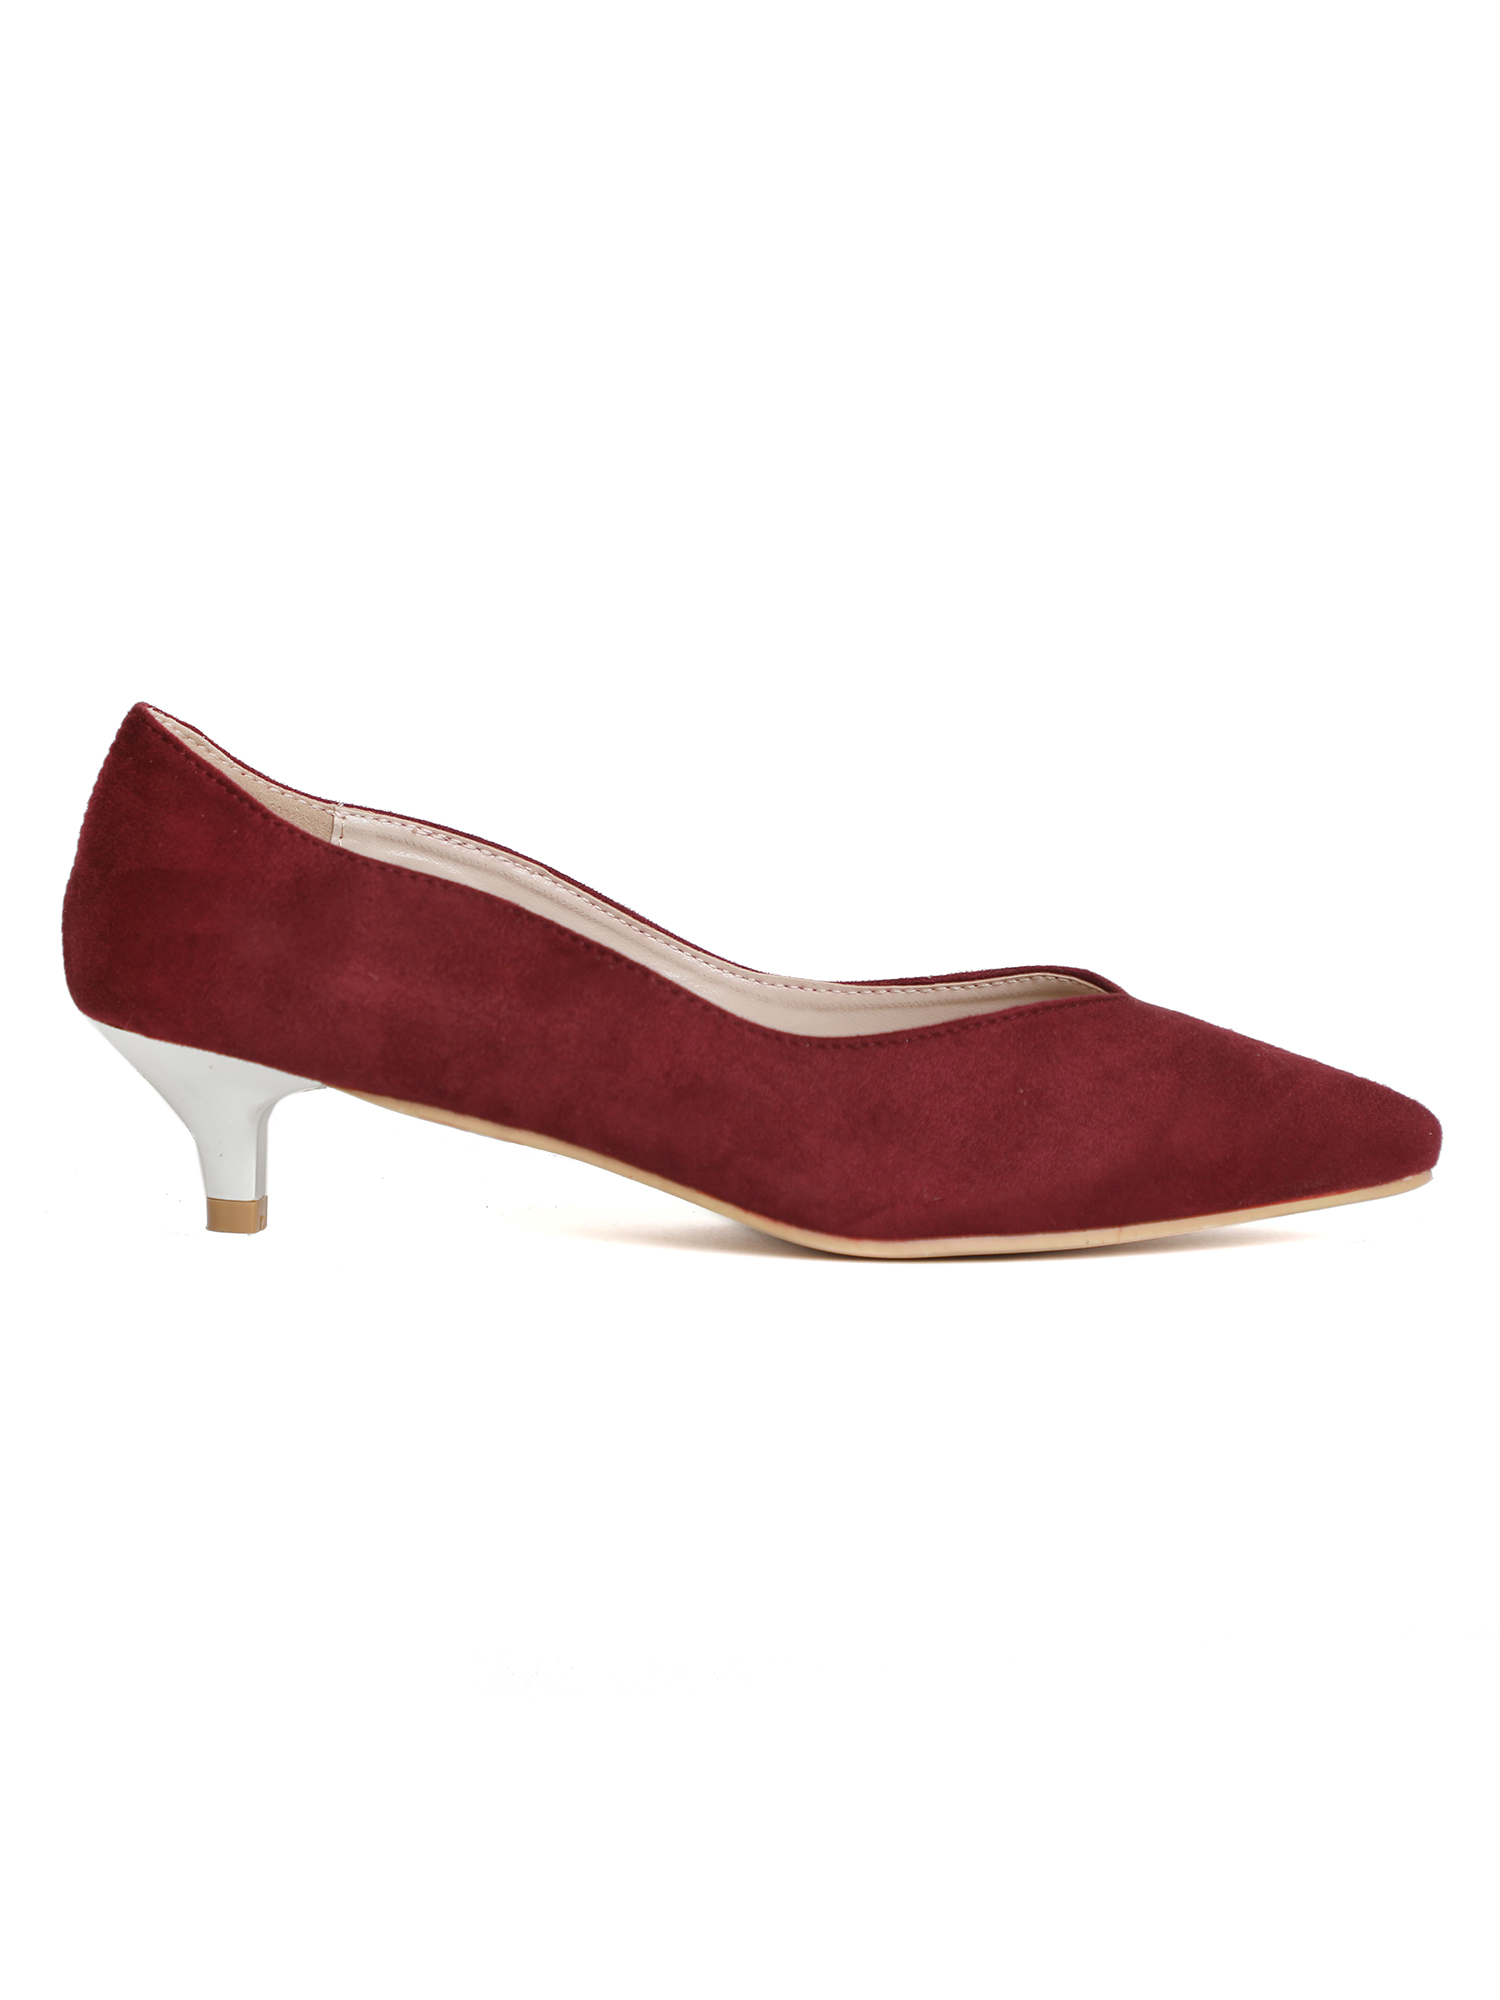 Chrome-accented Pointed Toe Women's Kitten Heels in Burgundy - image 2 of 3